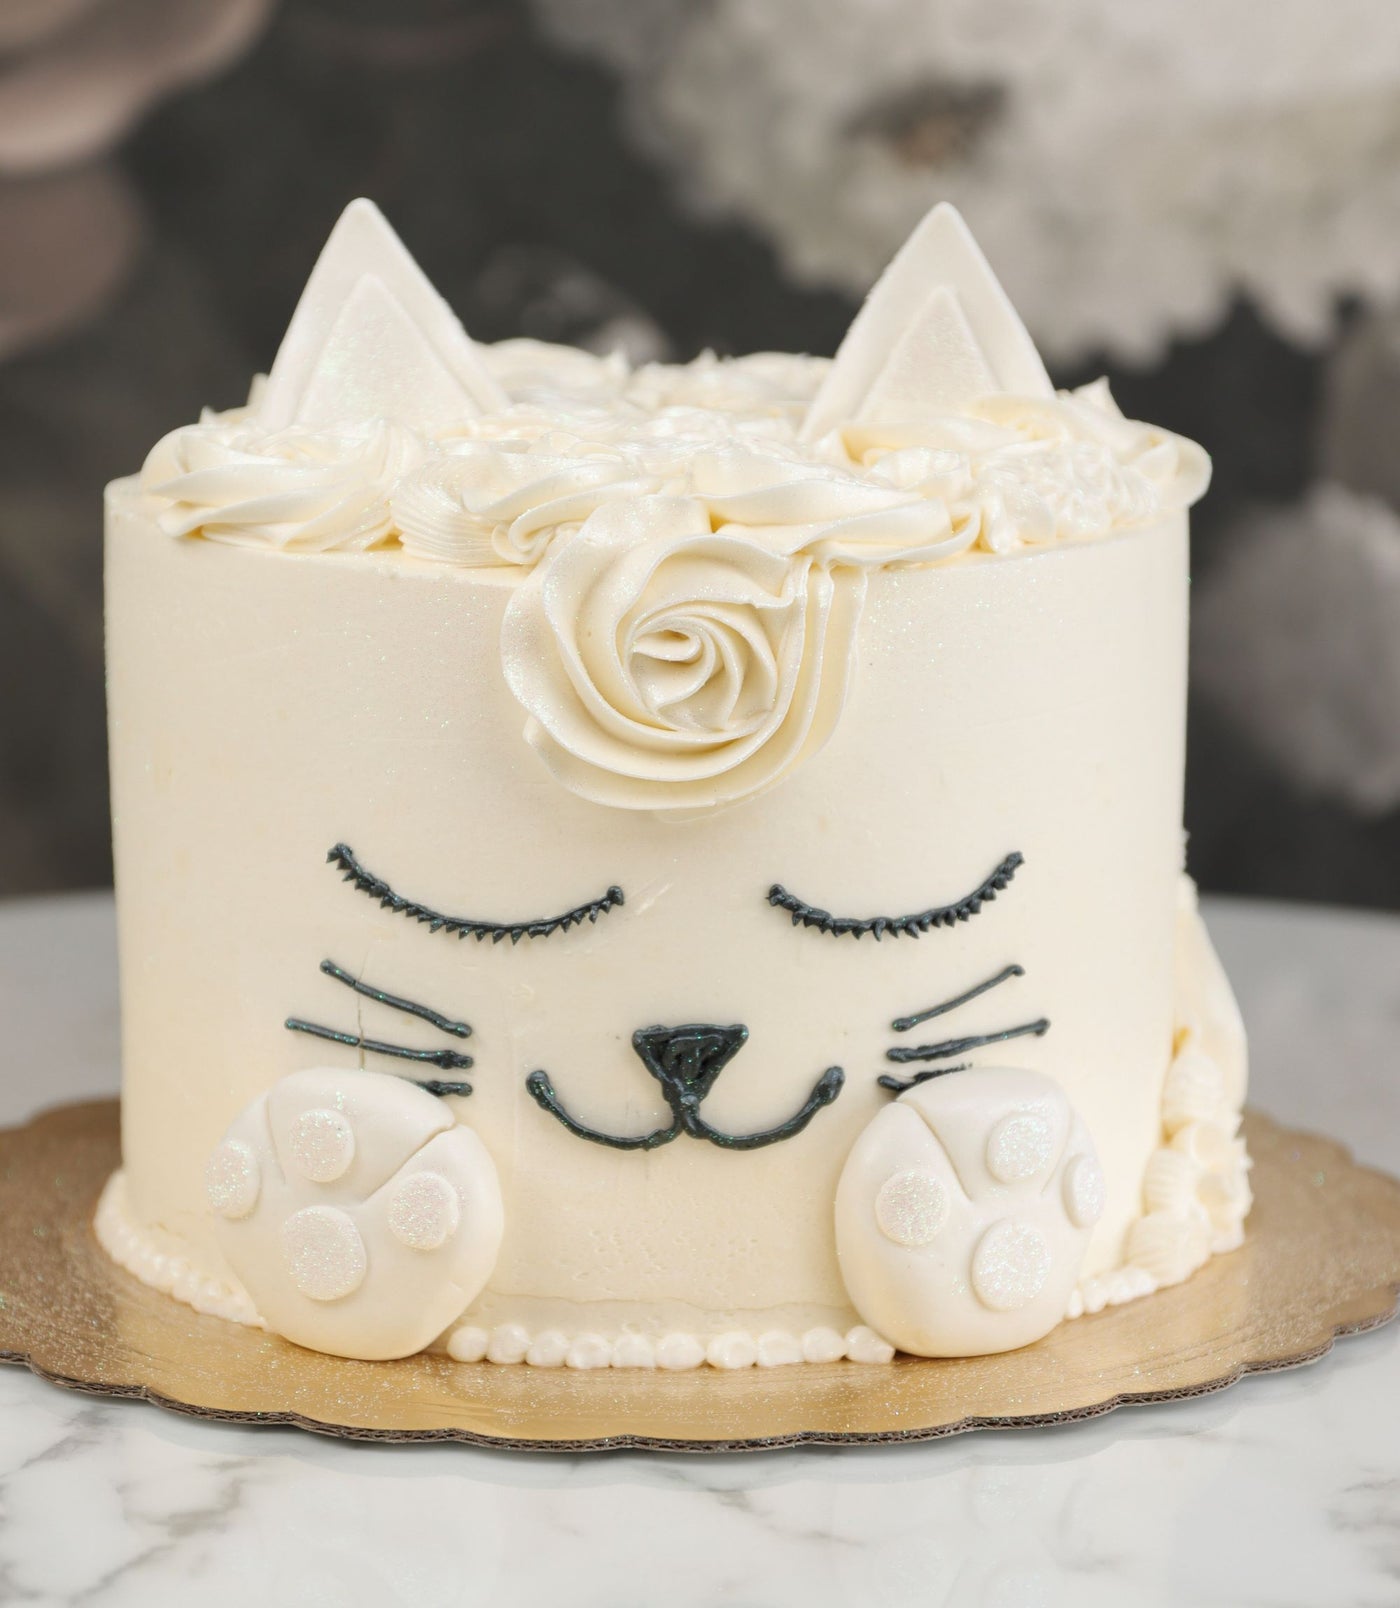 Kitty Cake Cute Cakes Delivery, Birthday Cakes With Cats